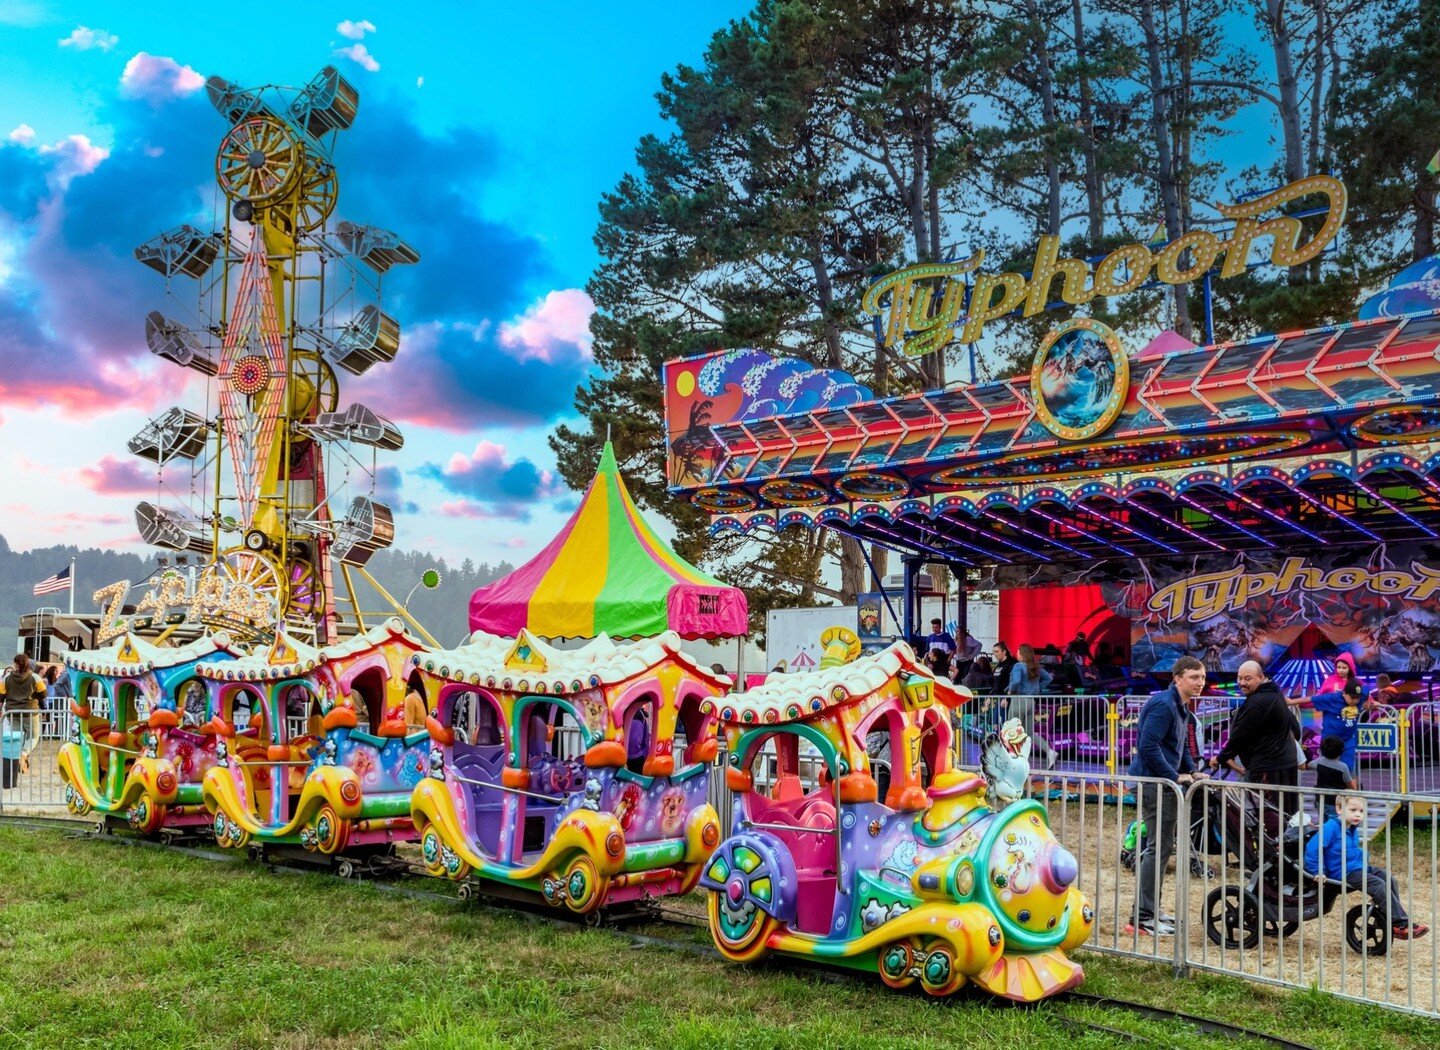 🎡 Aug 18-28th: The 126th Humboldt County Fair starts this week in @visitferndale! Bring the entire family for live music, horse races, carnival rides, livestock contests, horticulture, and a chili cook-off hosted by @guyfieri! 
👉 @humboldtcofair fo